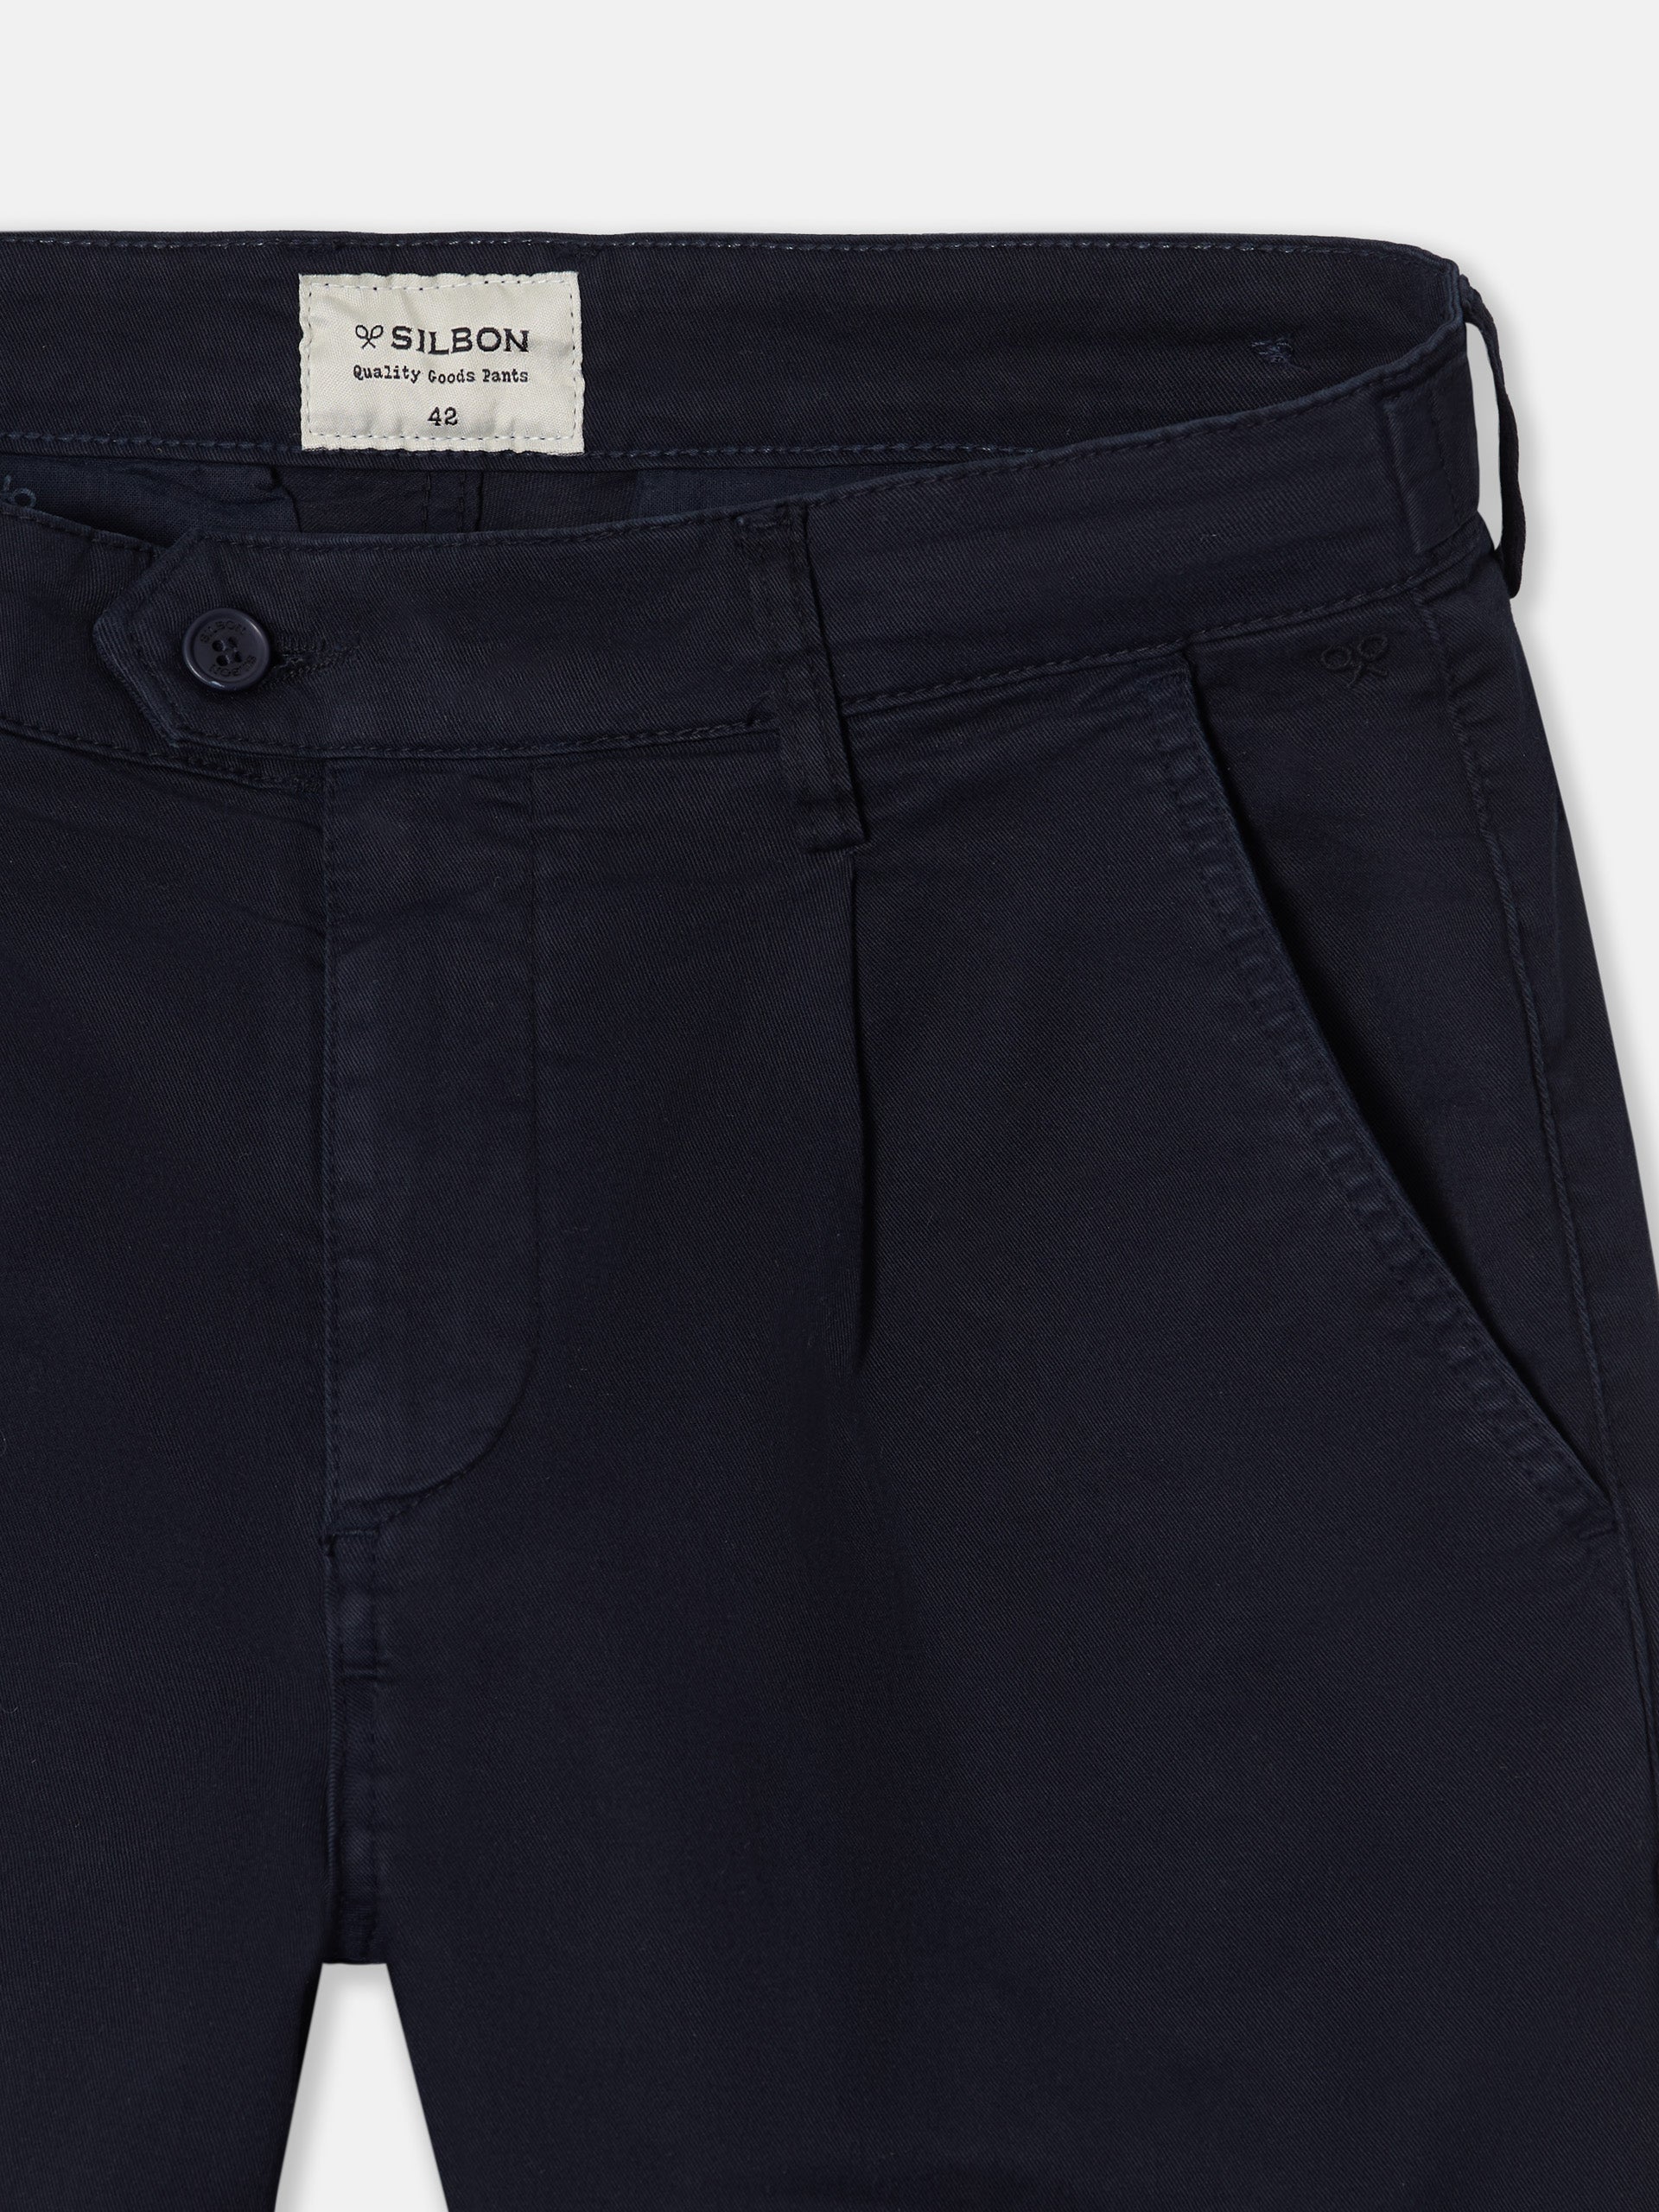 Navy blue pleated chino sport pants